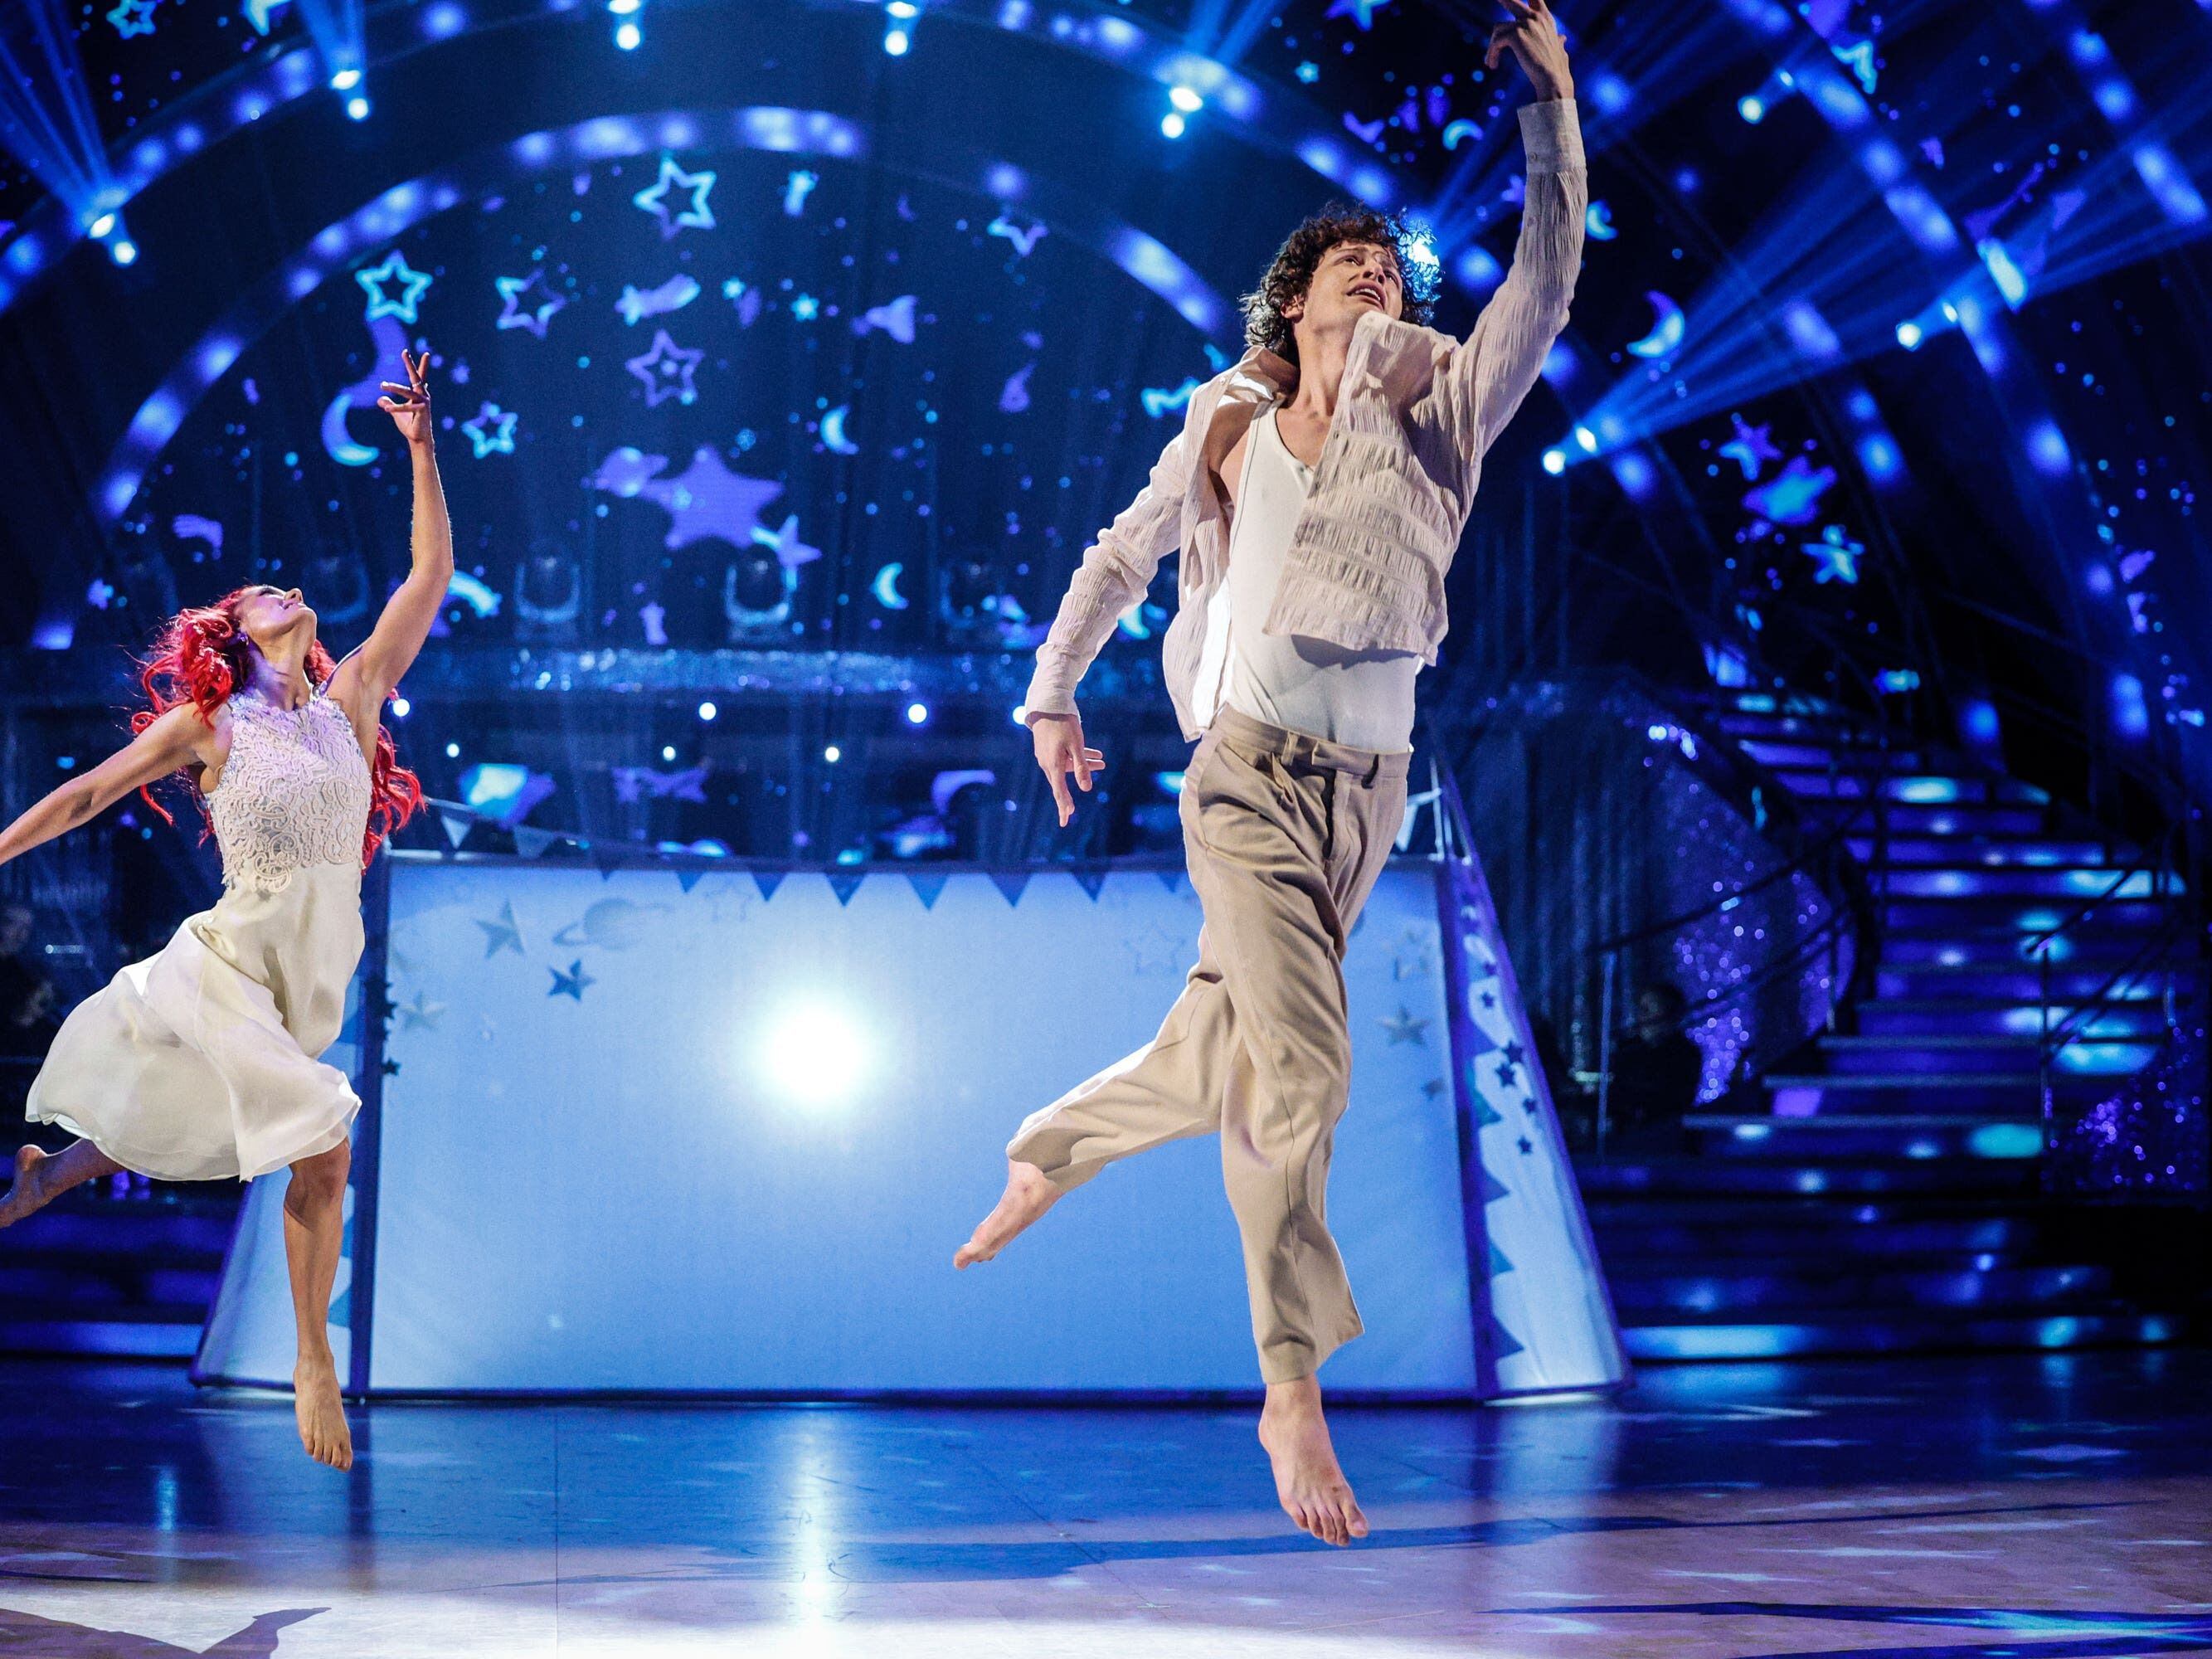 Bobby Brazier hopes to take viewers ‘on a journey’ during Strictly final